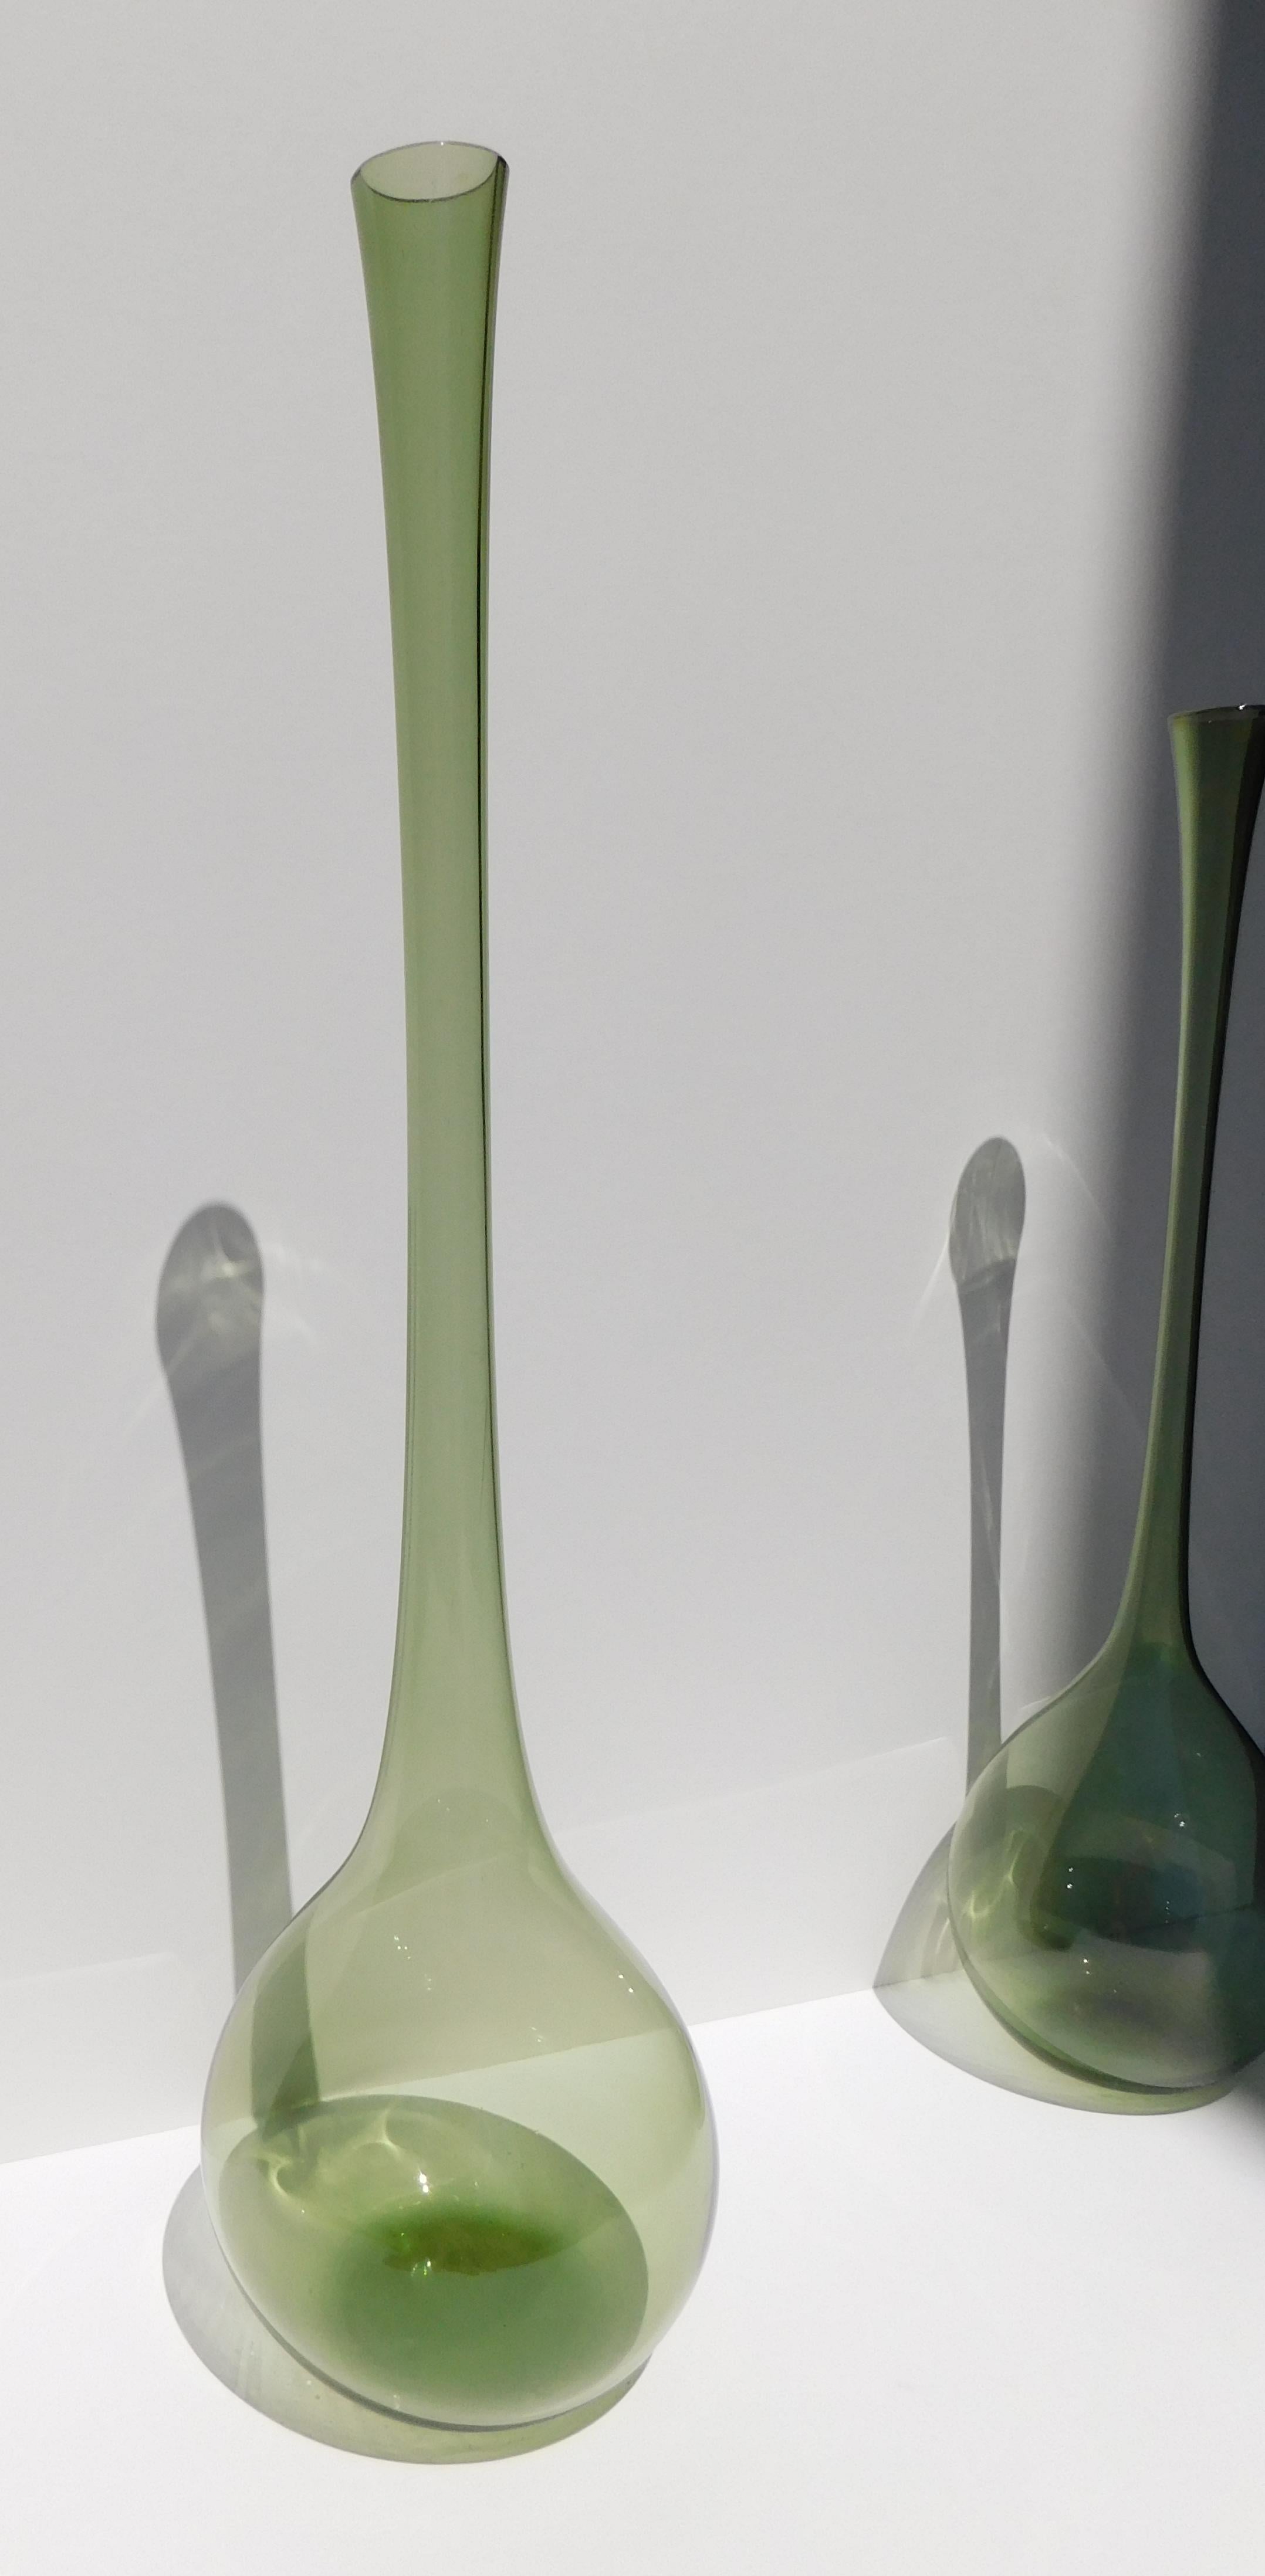 Set of two art glass vases most likely by Arthur Percy for Gullaskruf, Sweden, 1950s
Smoky green color
One measures: 20 3/4